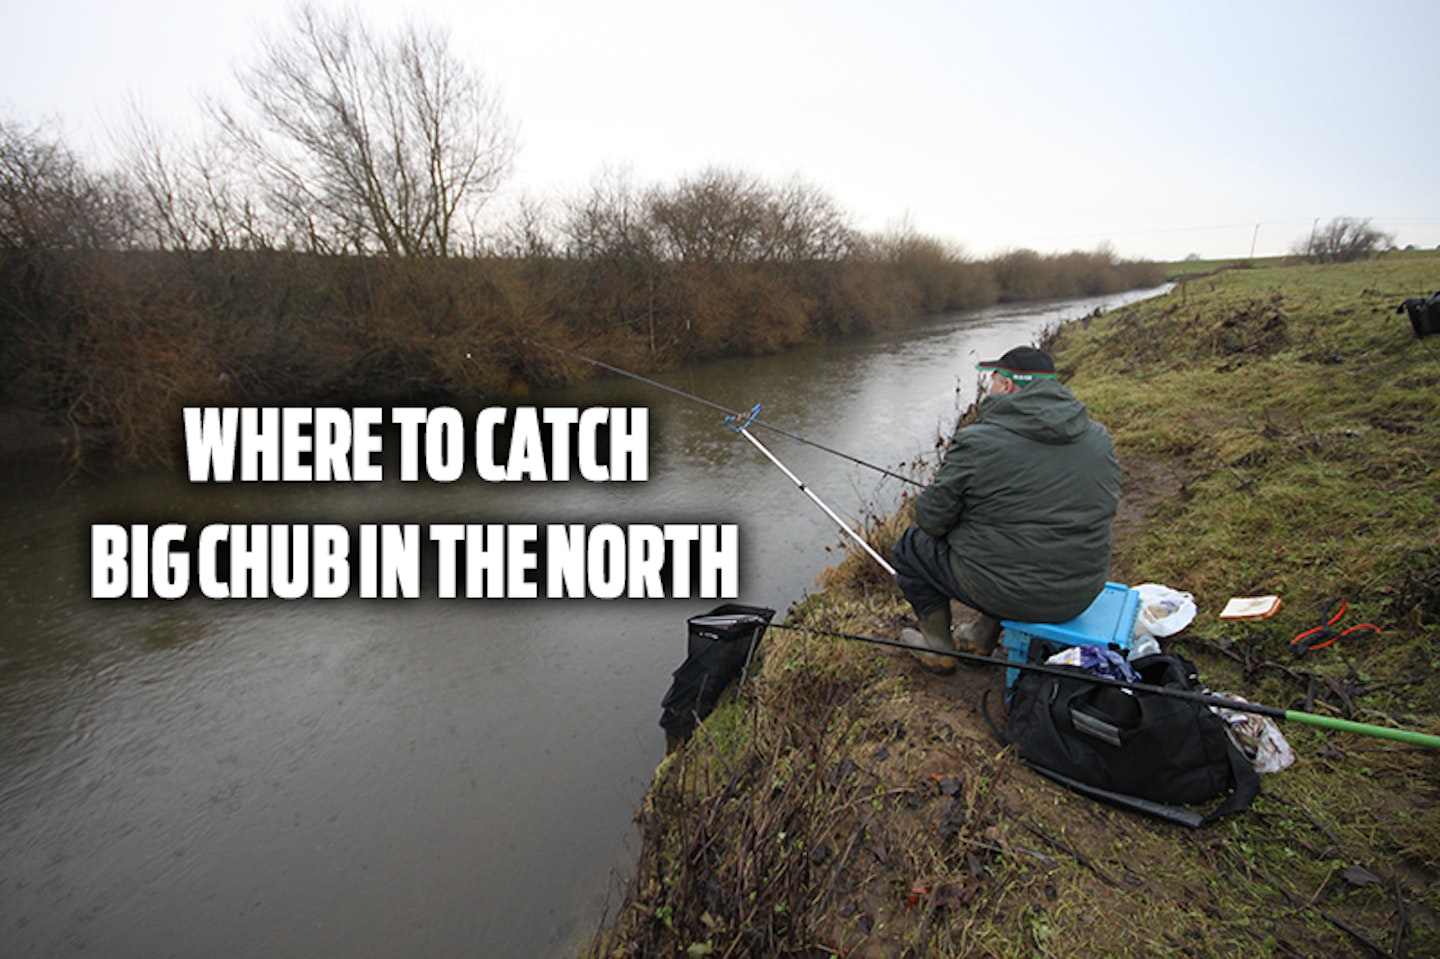 10 Essential tips to help you plan the perfect UK fishing holiday